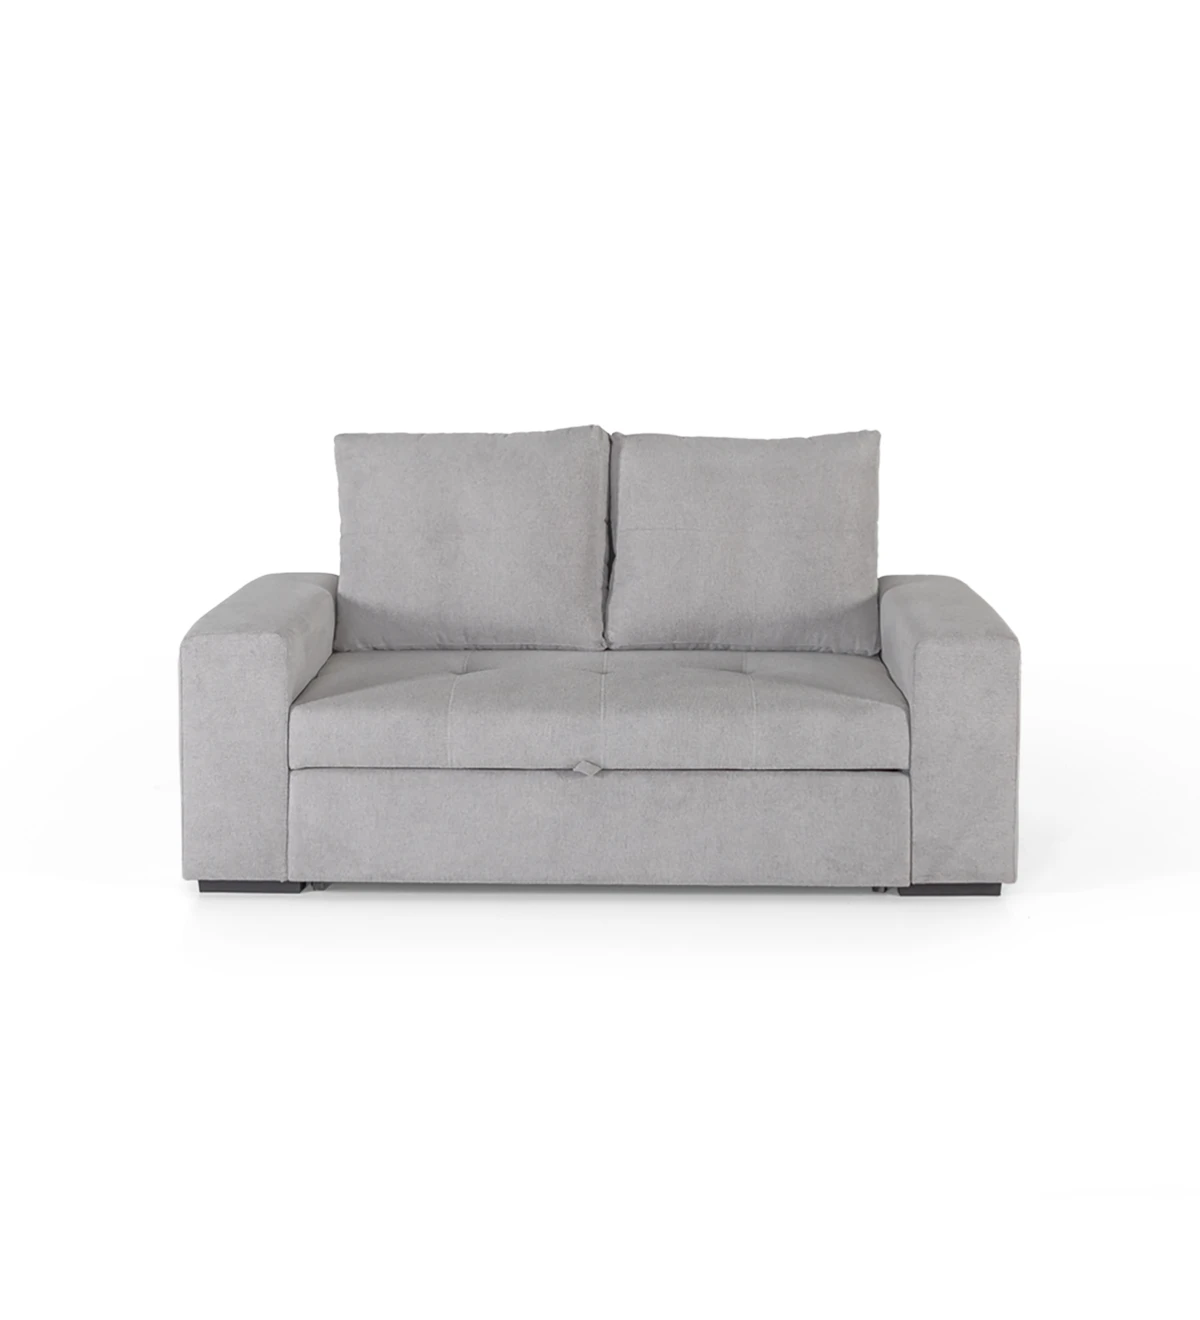 Haiti 2-seater sofa bed upholstered in gray fabric, removable back cushions, 180 cm.